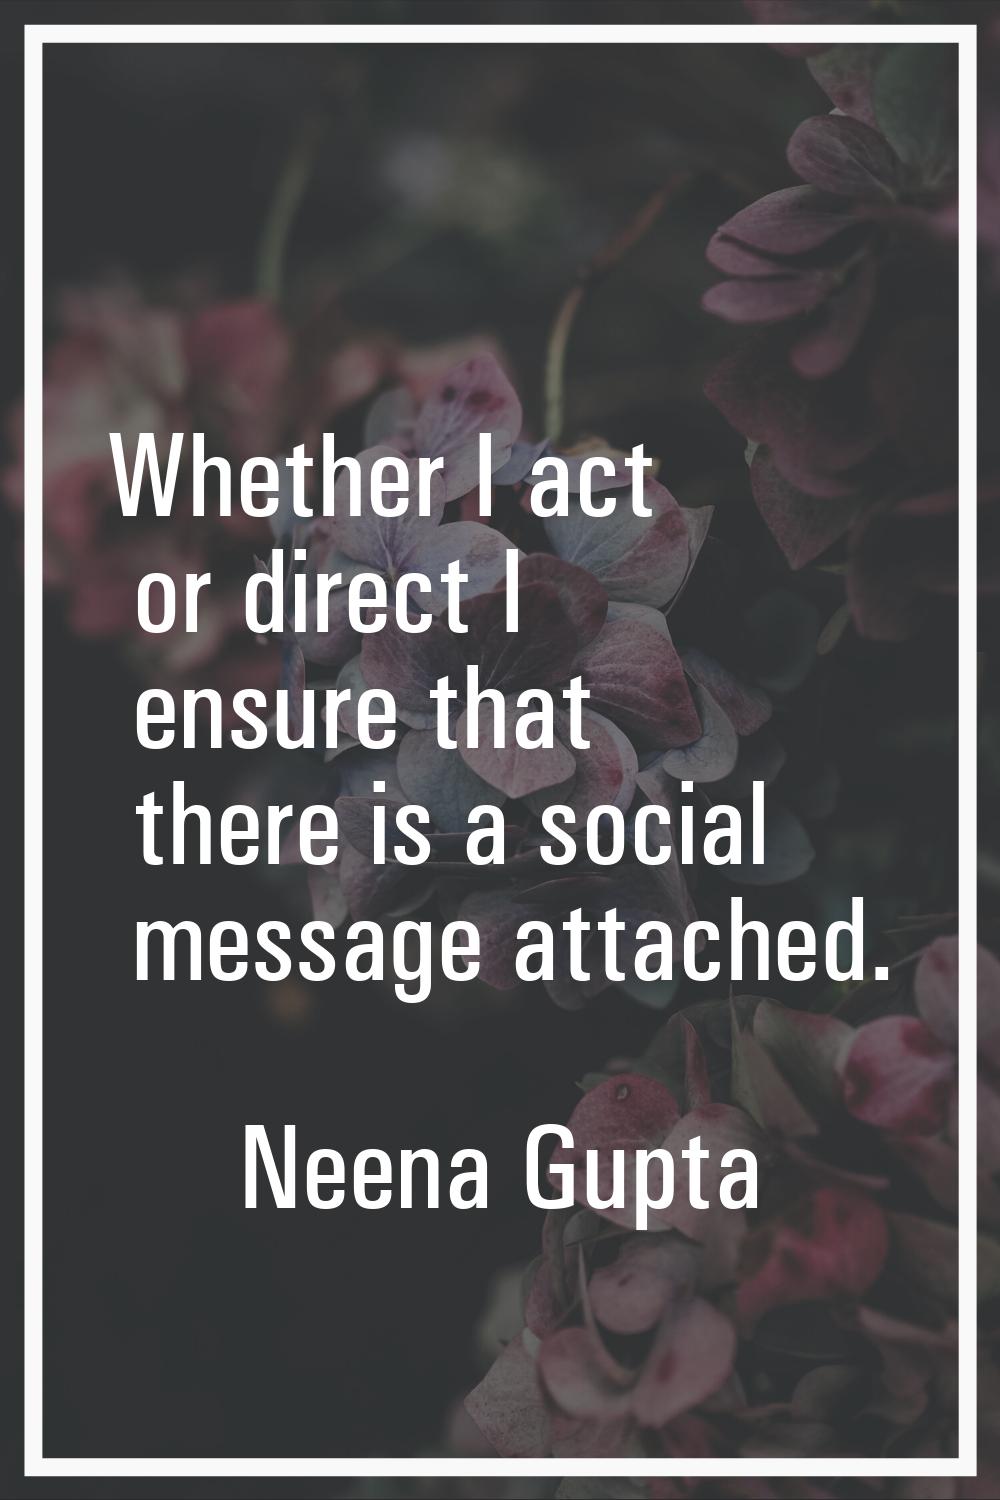 Whether I act or direct I ensure that there is a social message attached.